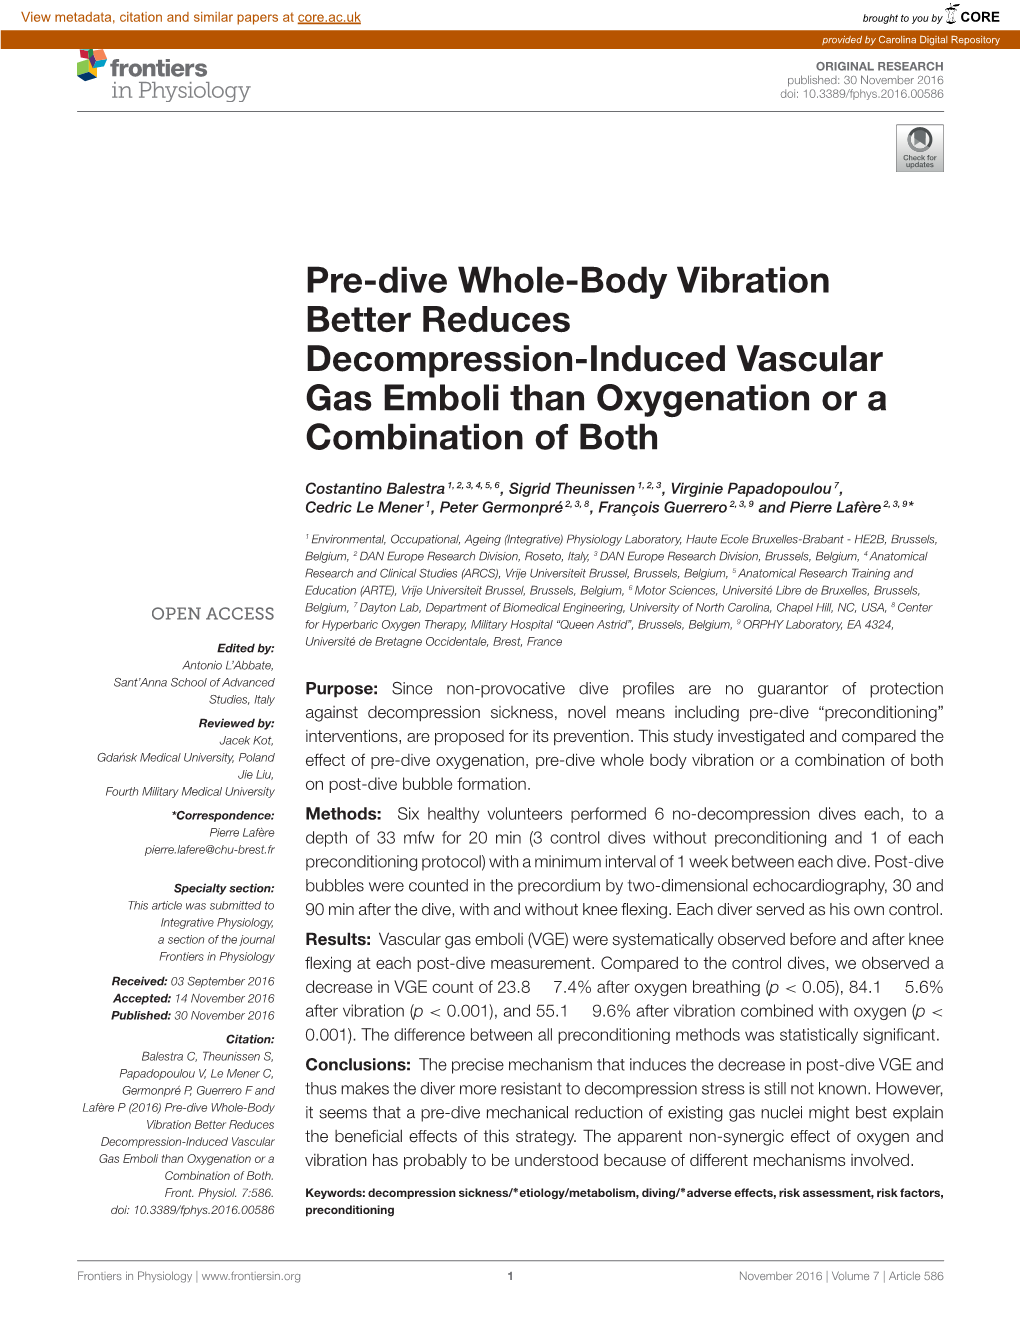 Pre-Dive Whole-Body Vibration Better Reduces Decompression-Induced Vascular Gas Emboli Than Oxygenation Or a Combination of Both